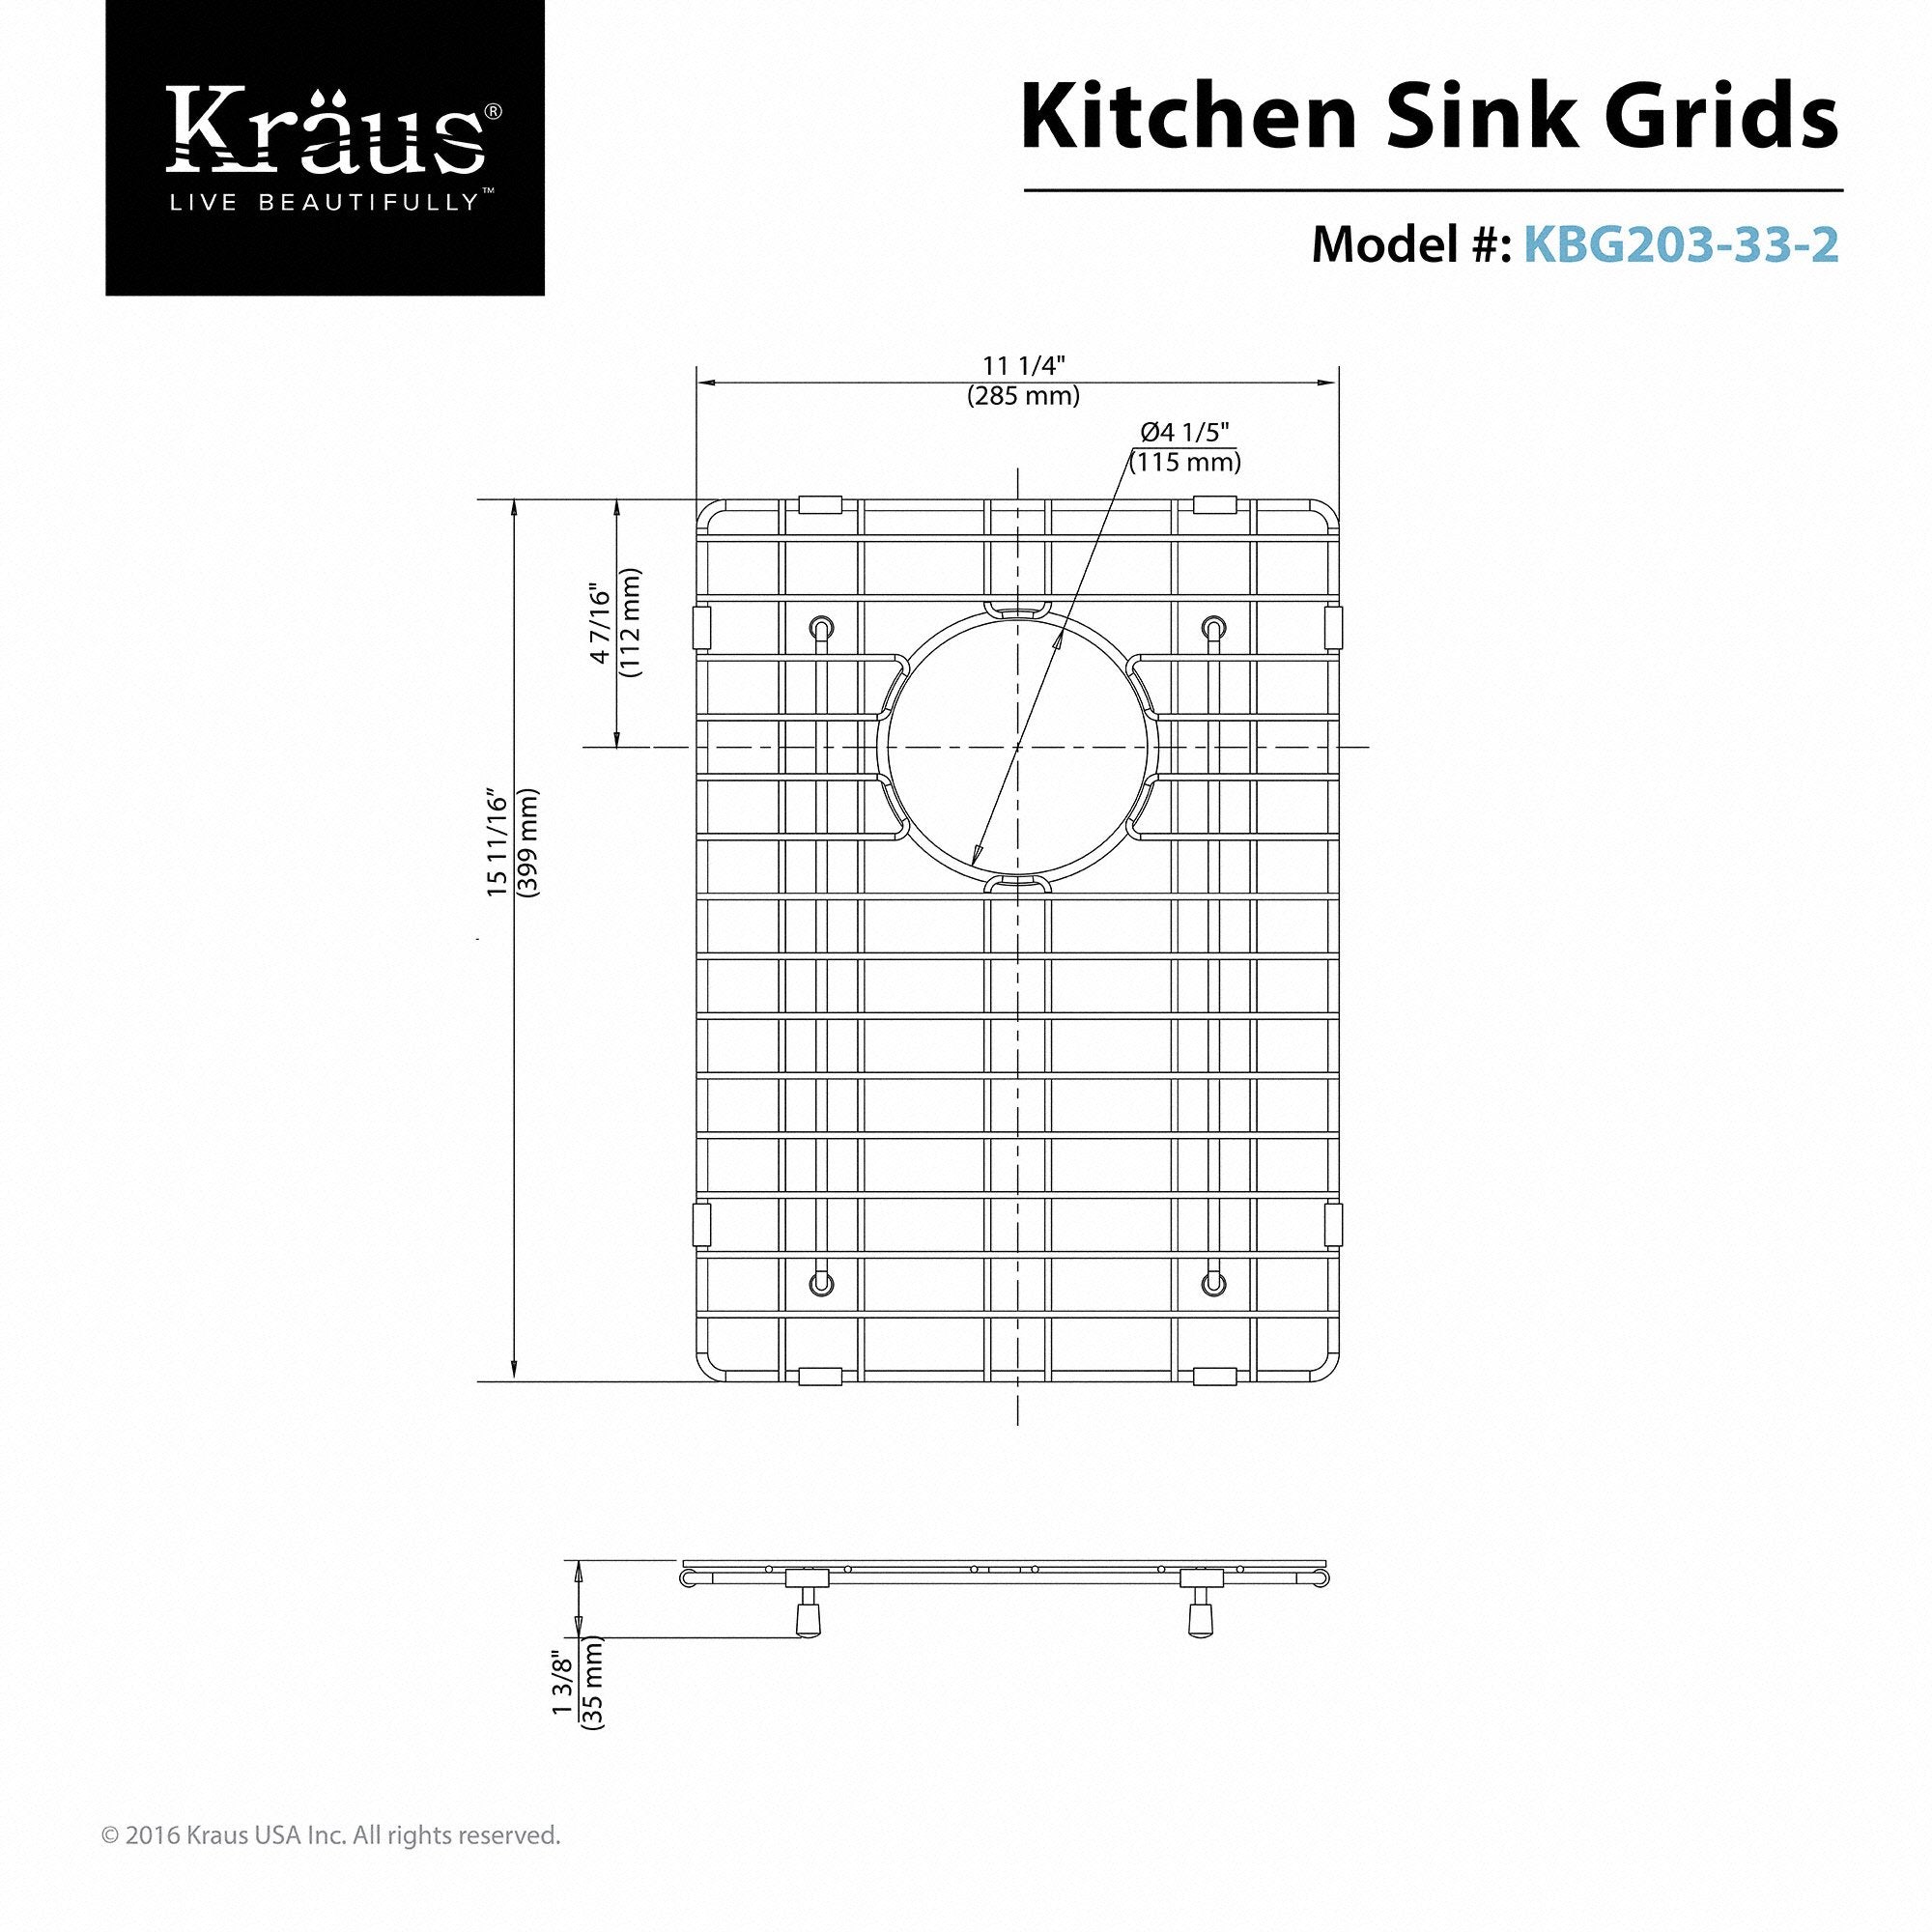 KRAUS Stainless Steel Bottom Grid with Protective Anti-Scratch Bumpers for KHF203-33 Kitchen Sink Right Bowl-Kitchen Accessories-KRAUS